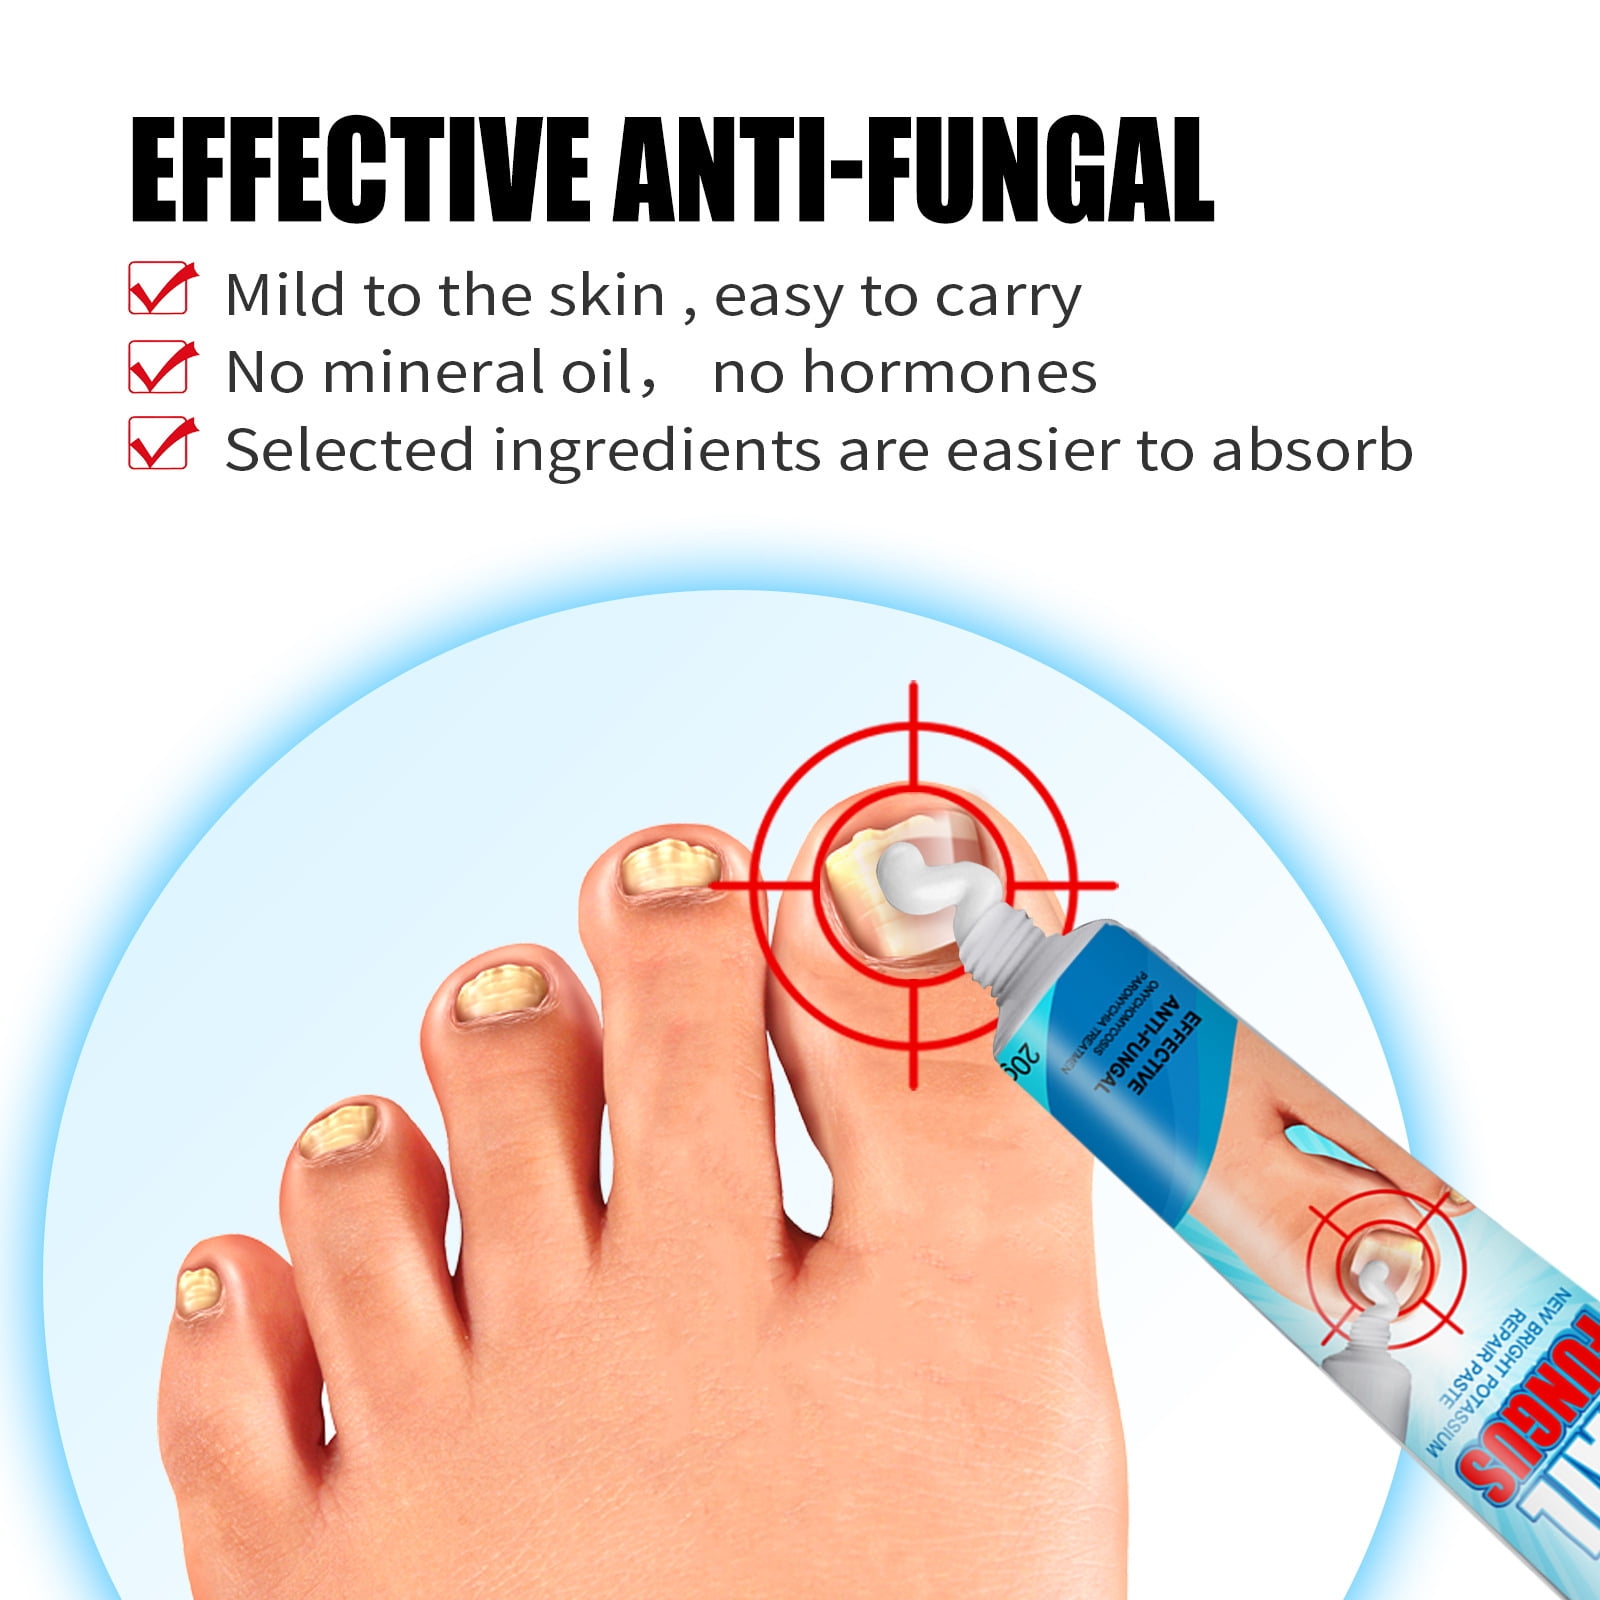 Fungal Nail Infection - Waverley Foot Clinic